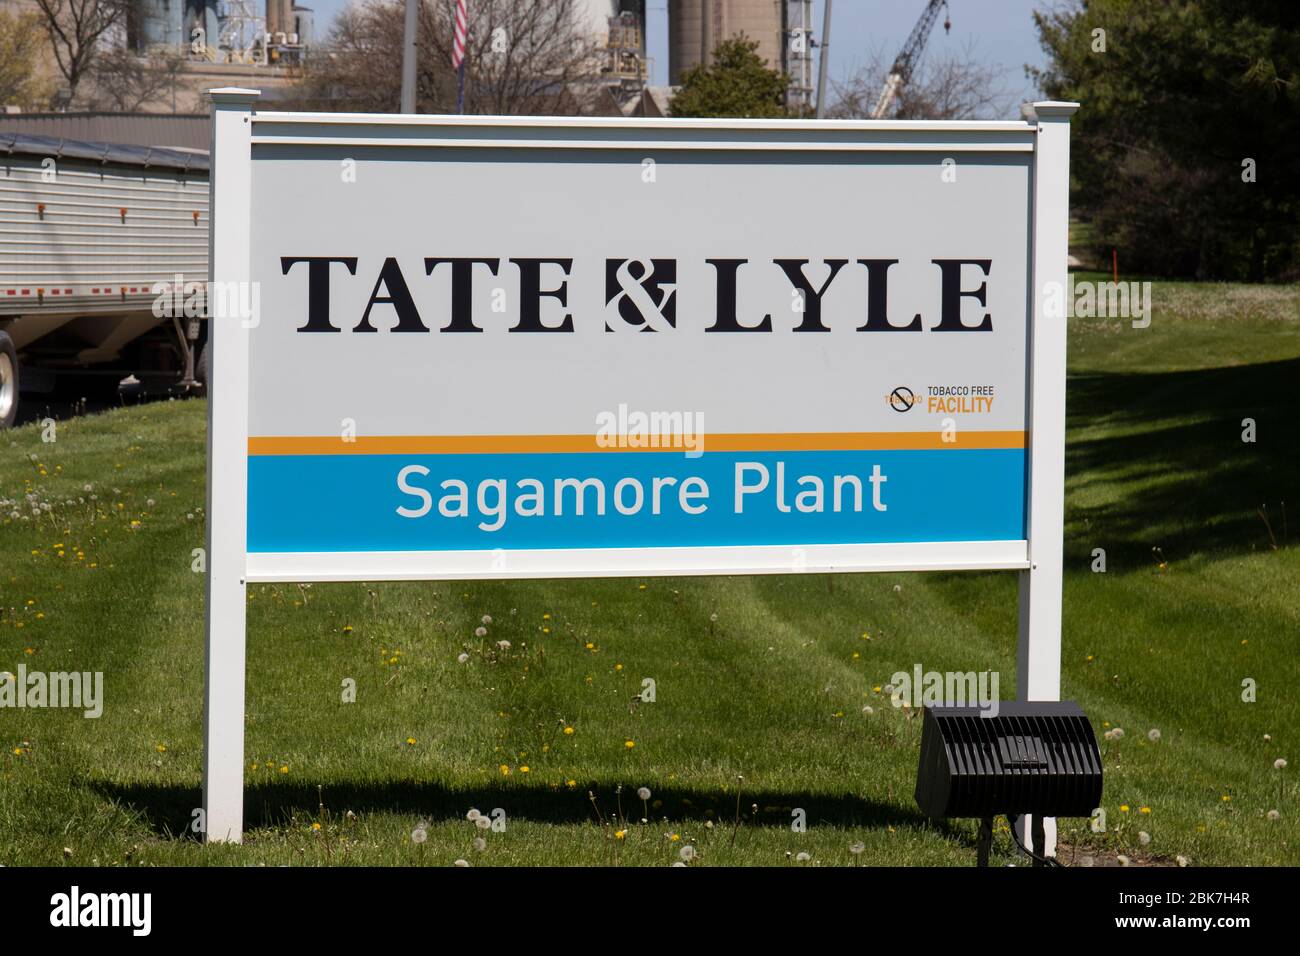 Lafayette - Circa May 2020: Tate & Lyle Sagamore Plant. Tate & Lyle produces and supplies innovative corn-based ingredients for food and beverage prod Stock Photo